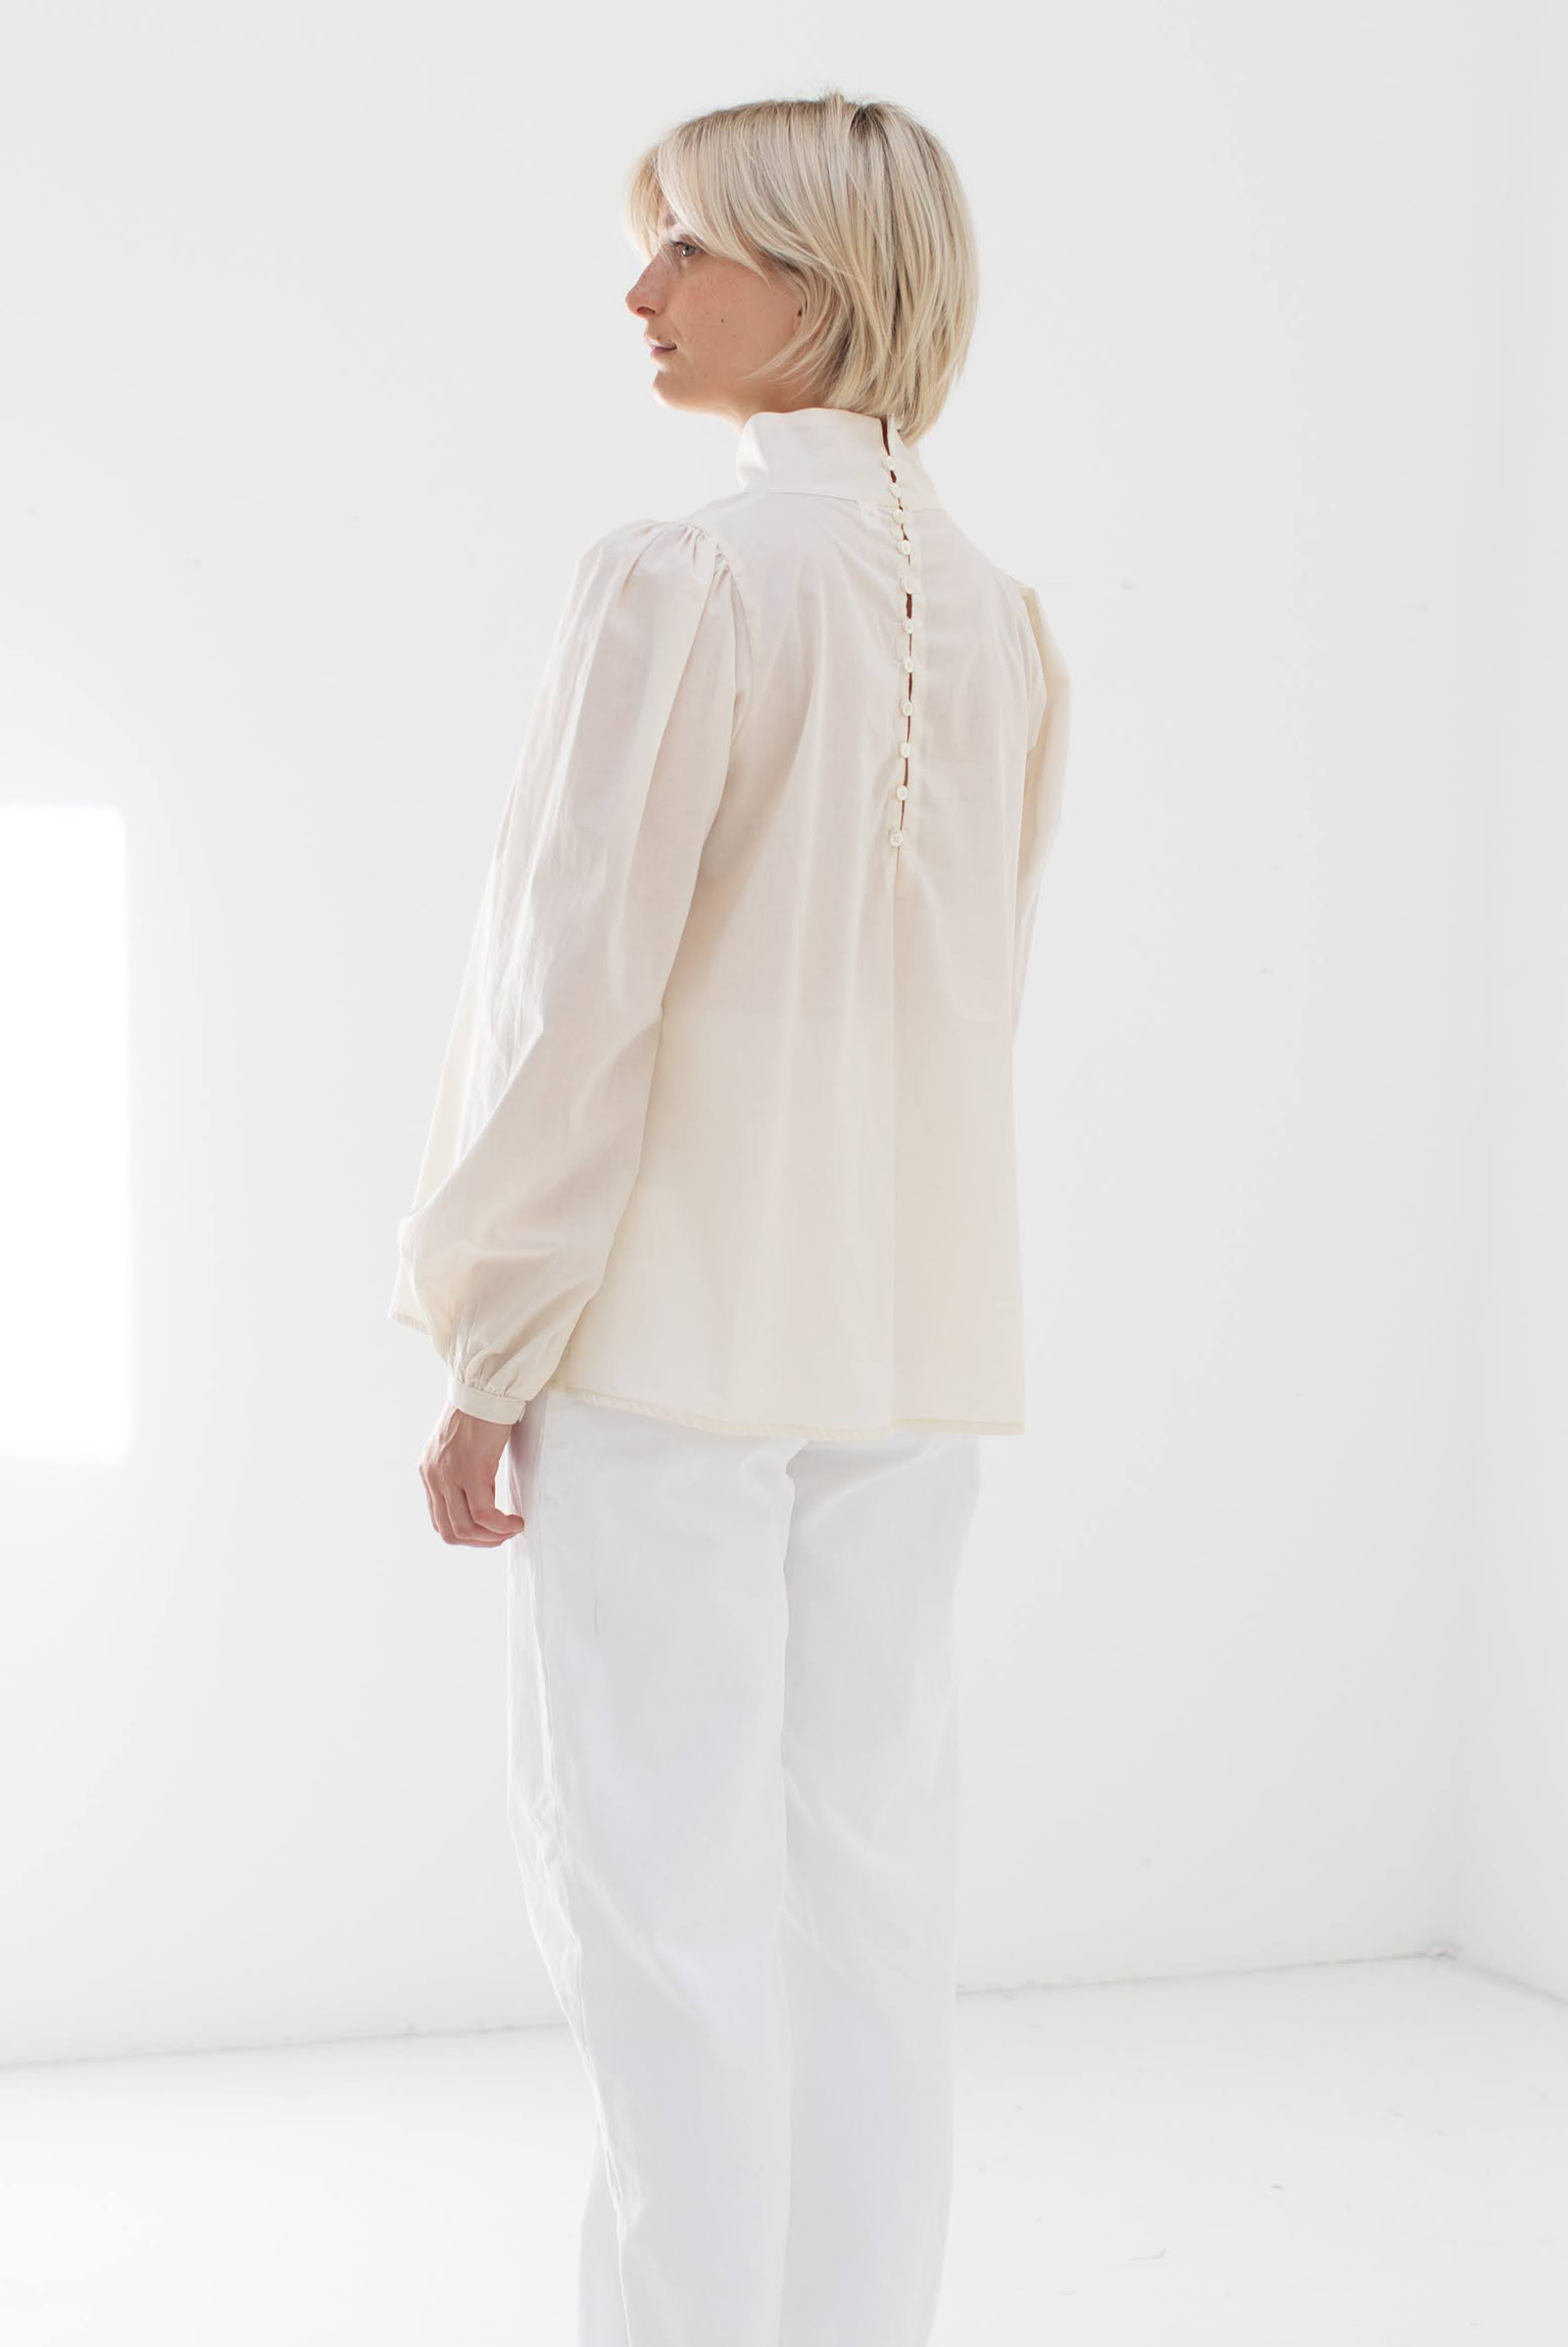 Ami Blouse in Ivory